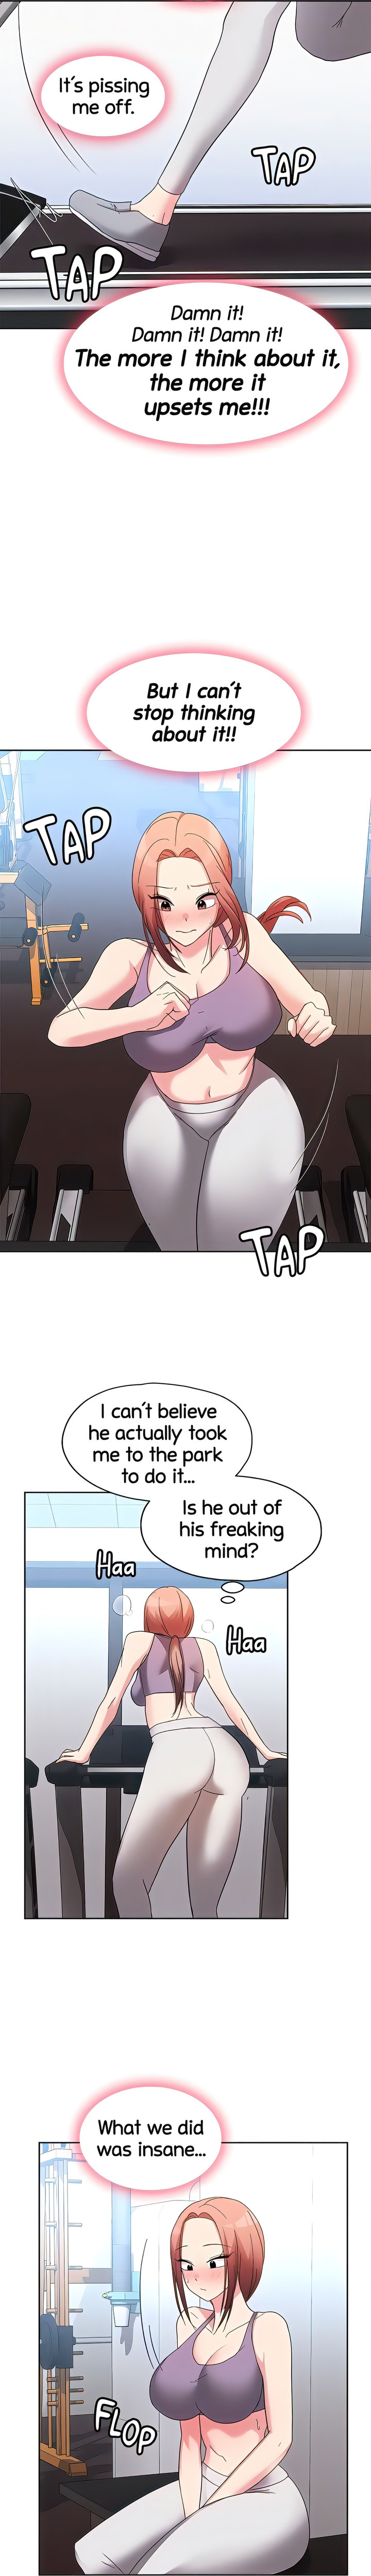 Girls I Used to Teach - Chapter 26 Page 20